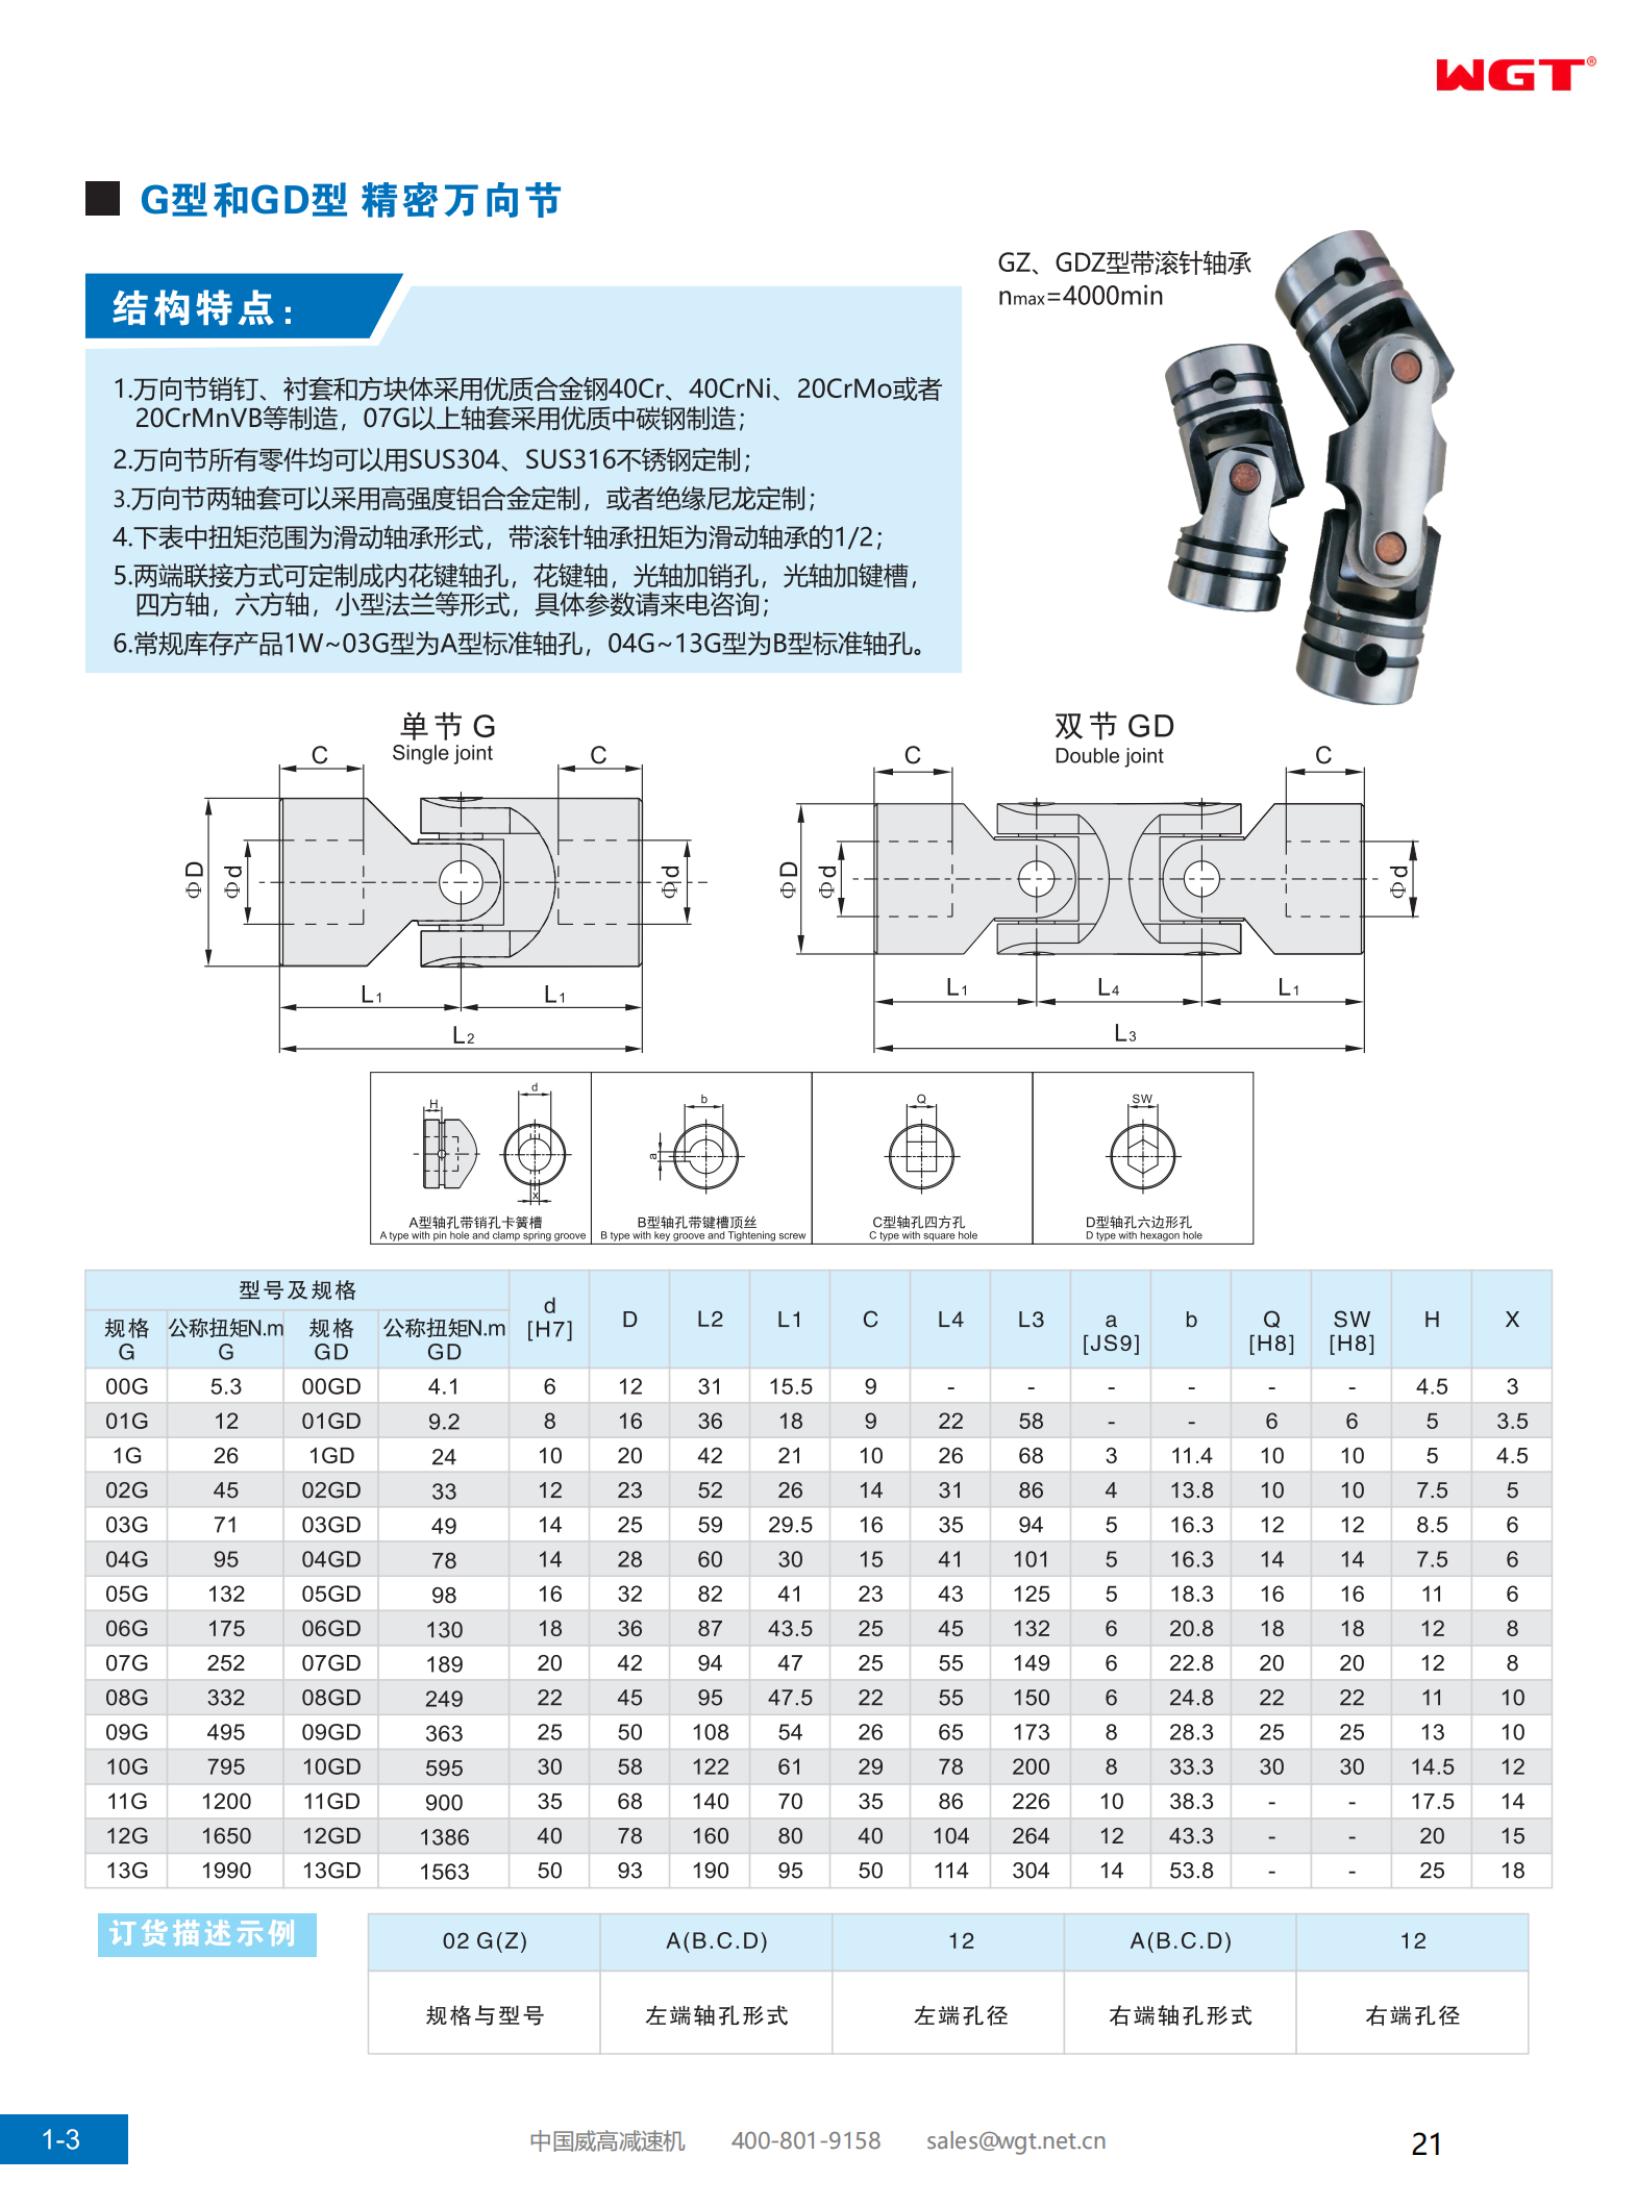 G and GD precision universal joints